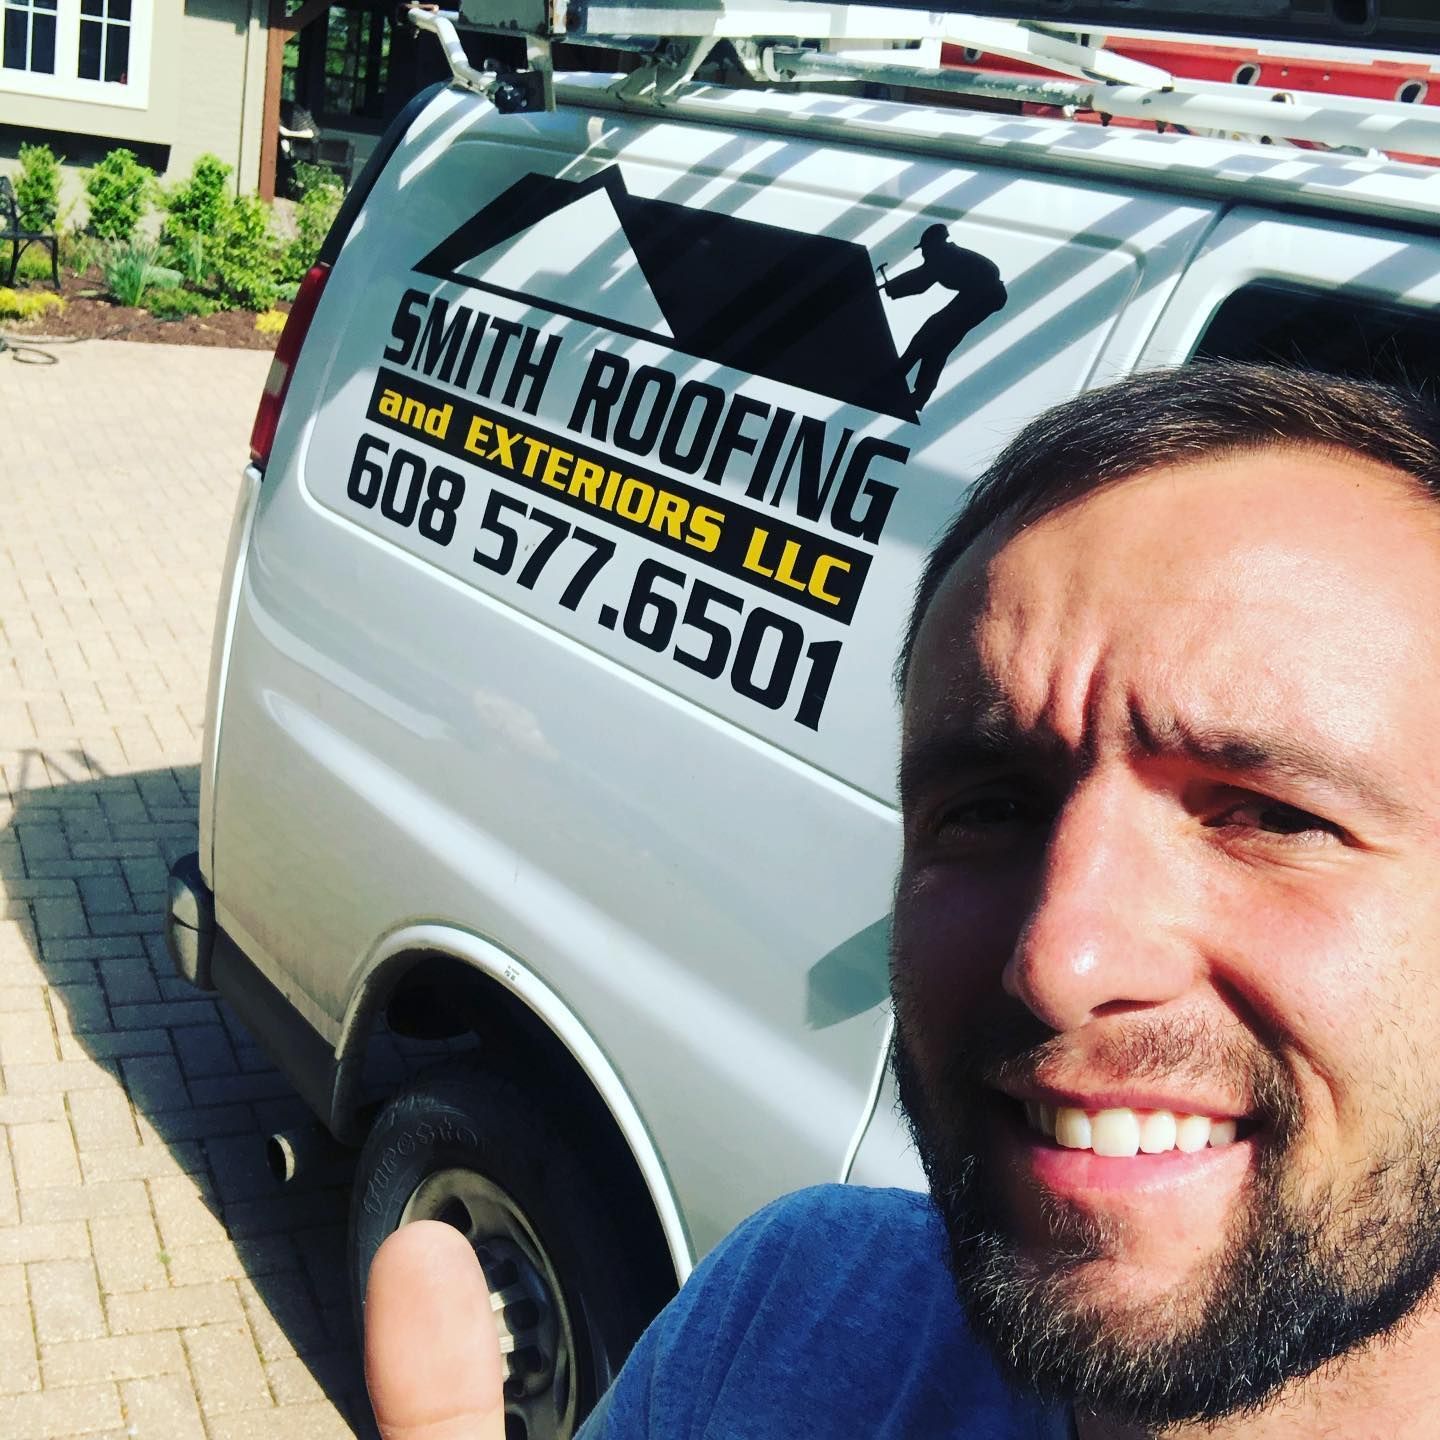 owner standing in front of a van that says smith roofing and exteriors llc